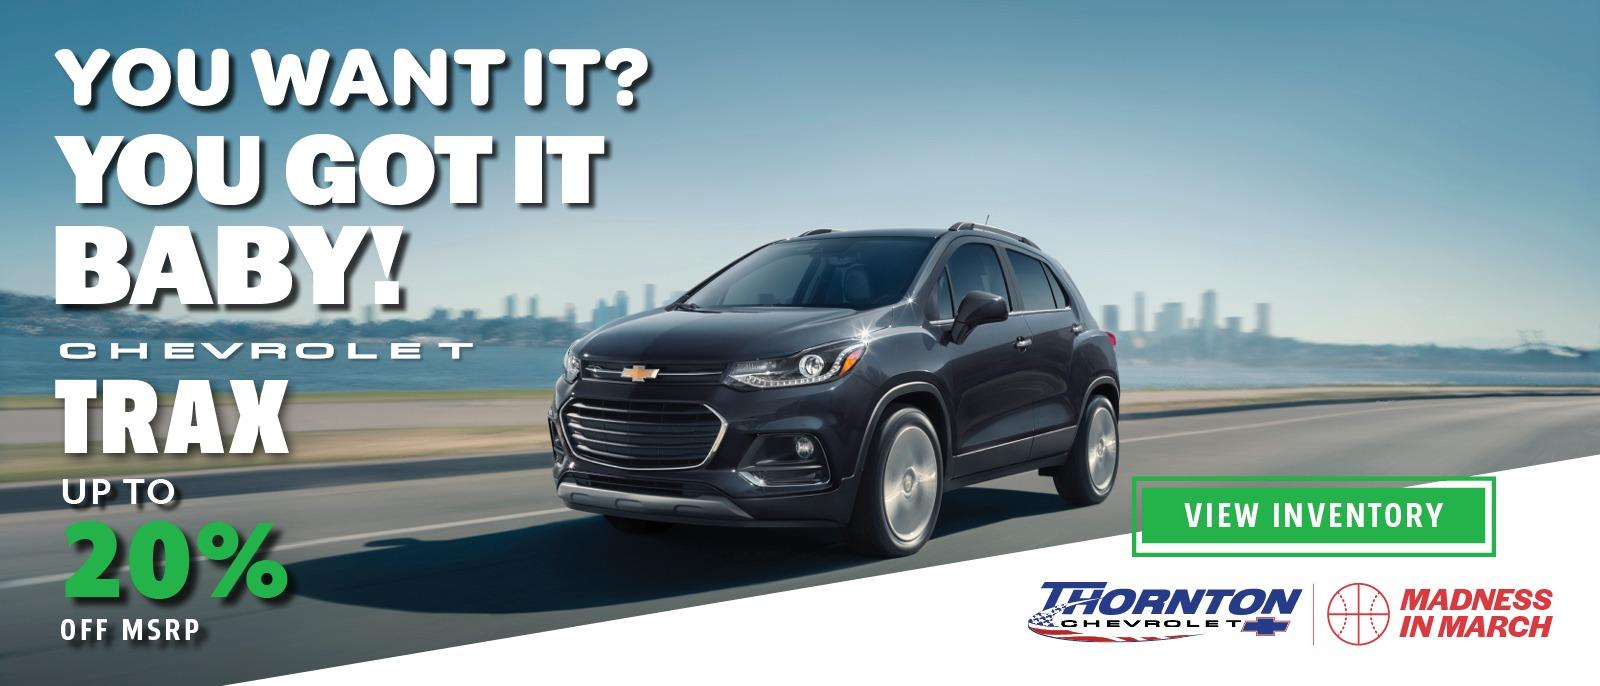 Chevy Trax Up to $20% Off MSRP